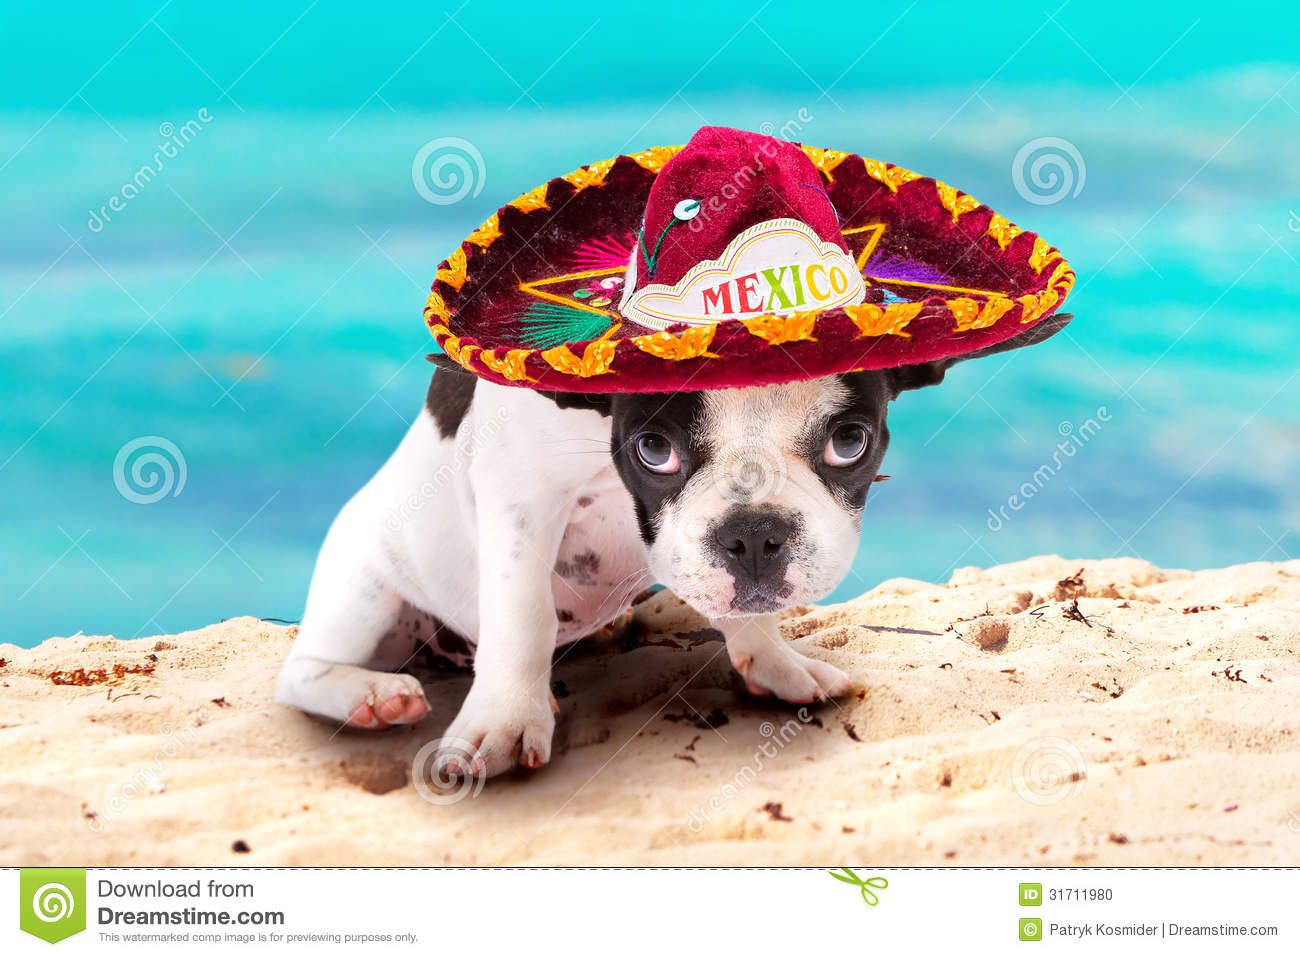 Puppy In Mexican Sombrero On The Beach Stock Photo   Image  31711980